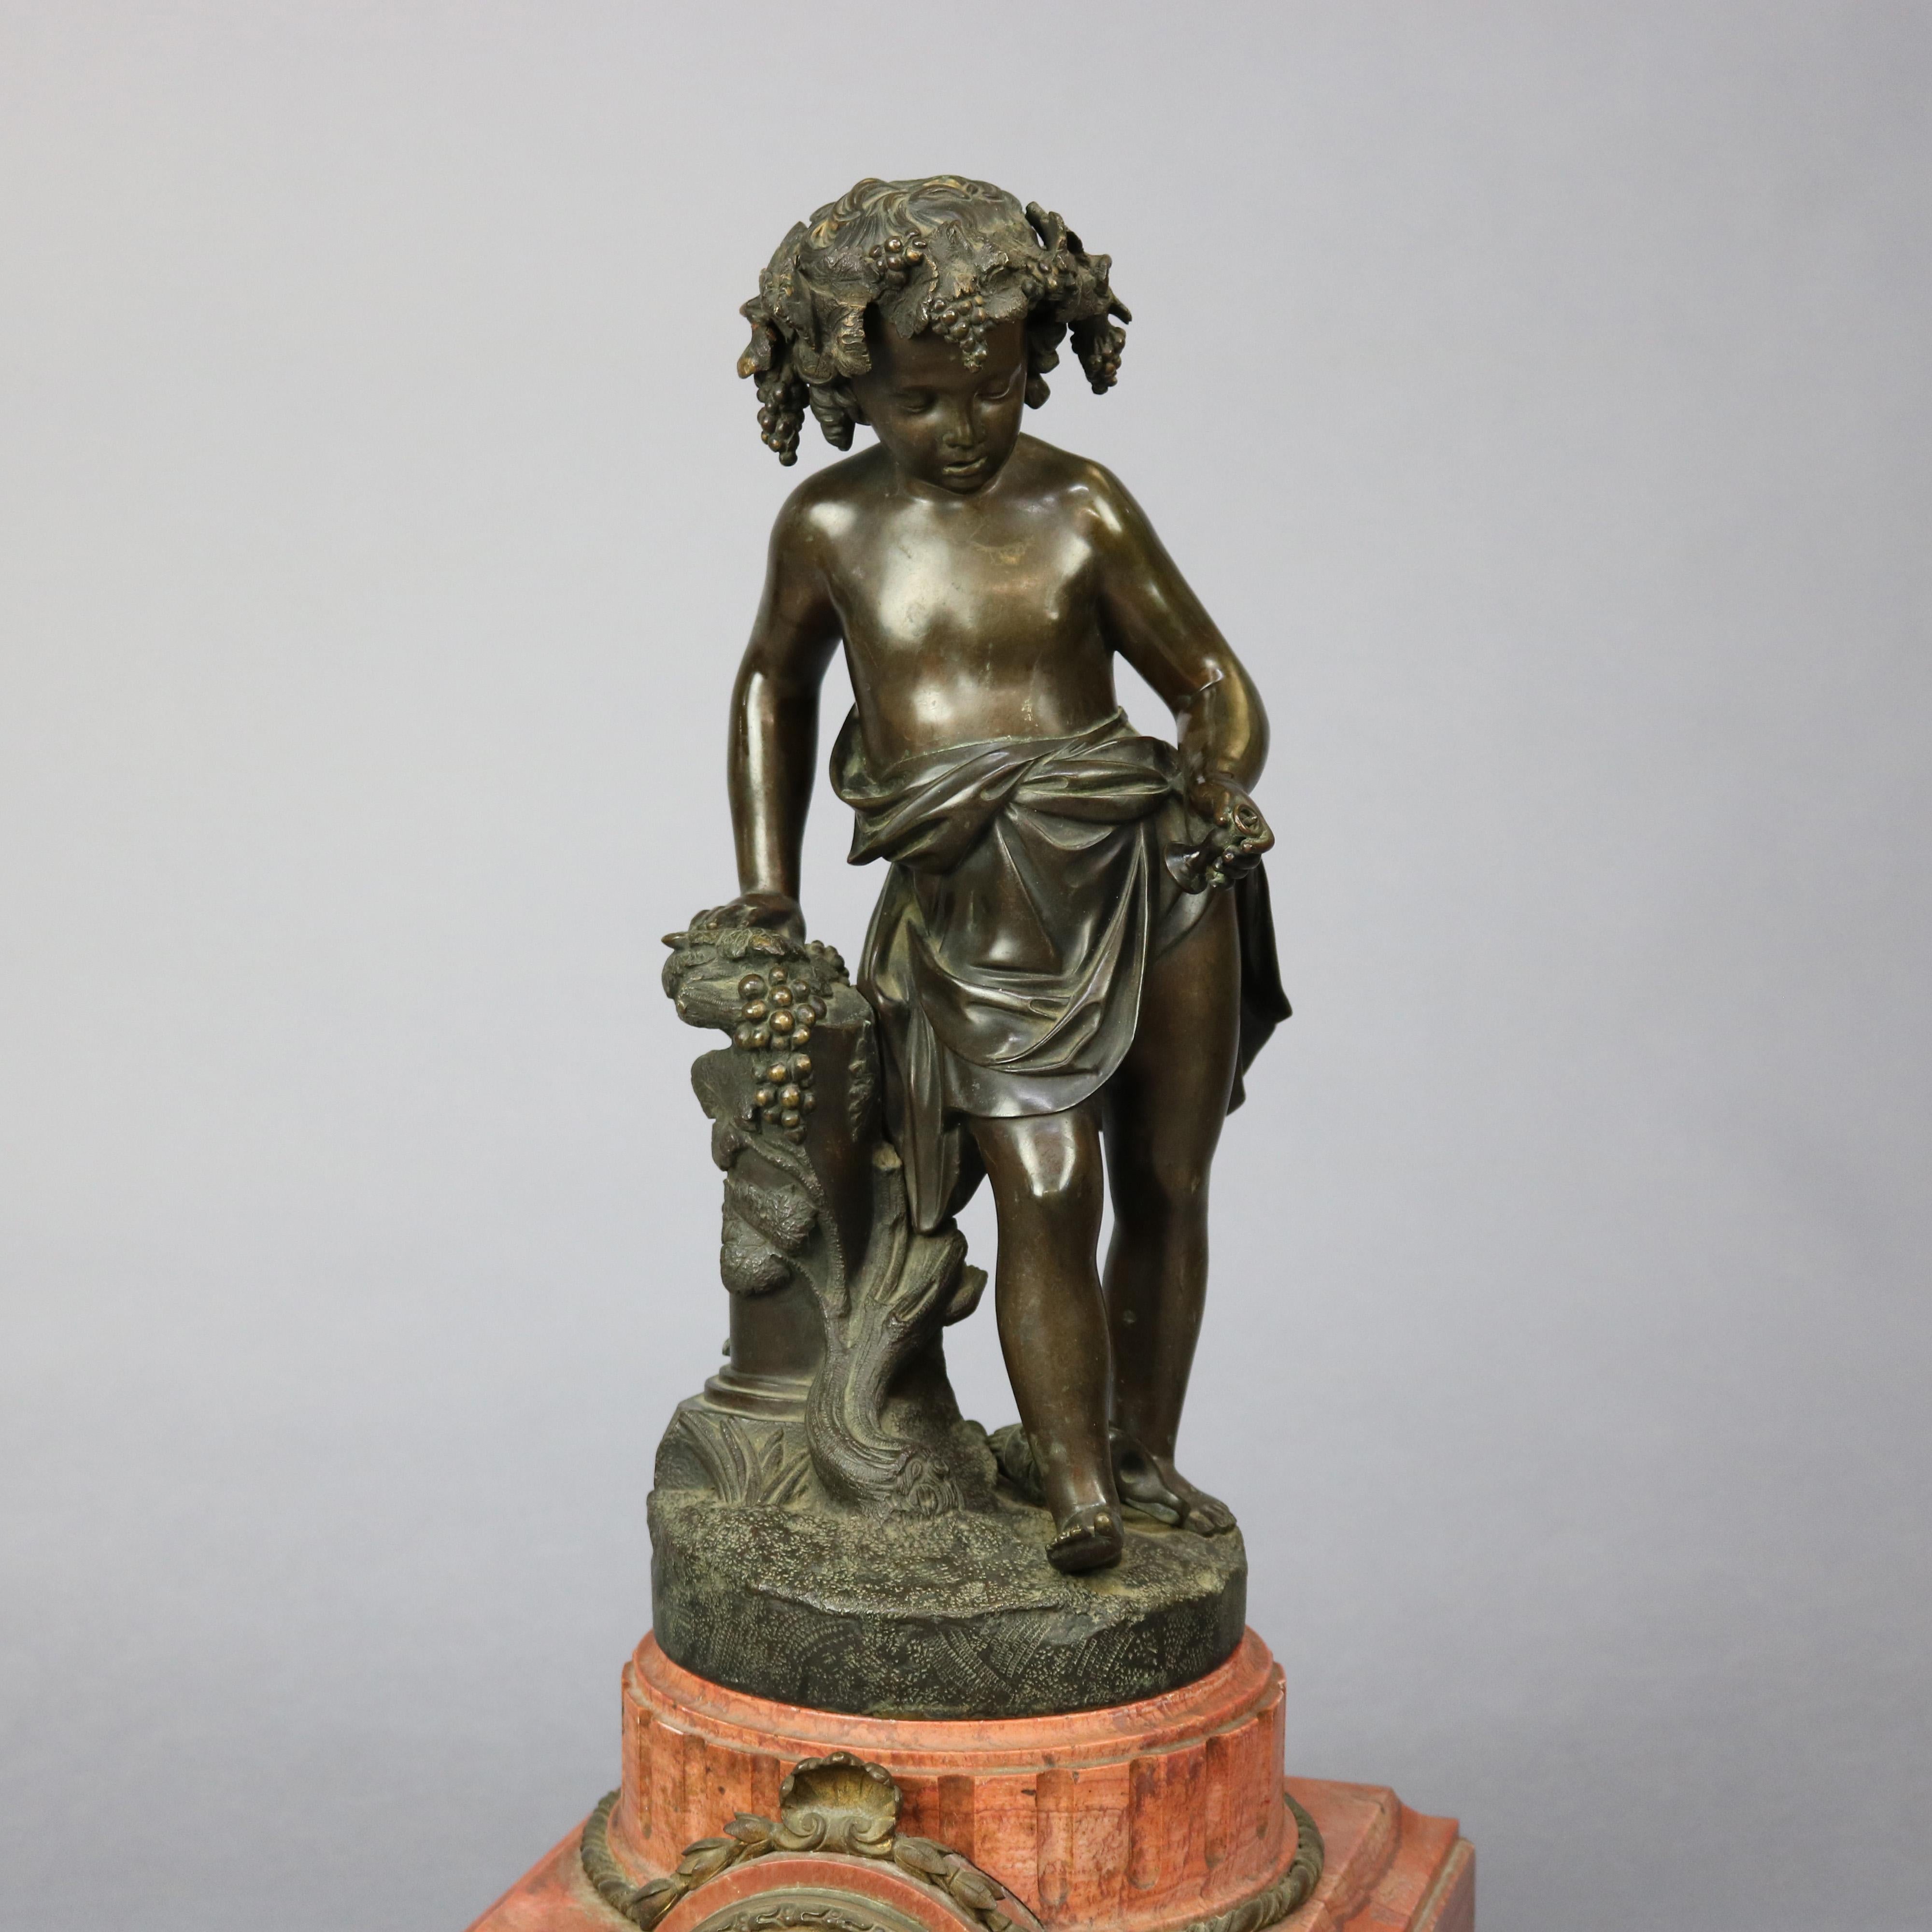 Cast Antique French Clock with Classical Bronze Sculpture of Young Boy, Circa 1890